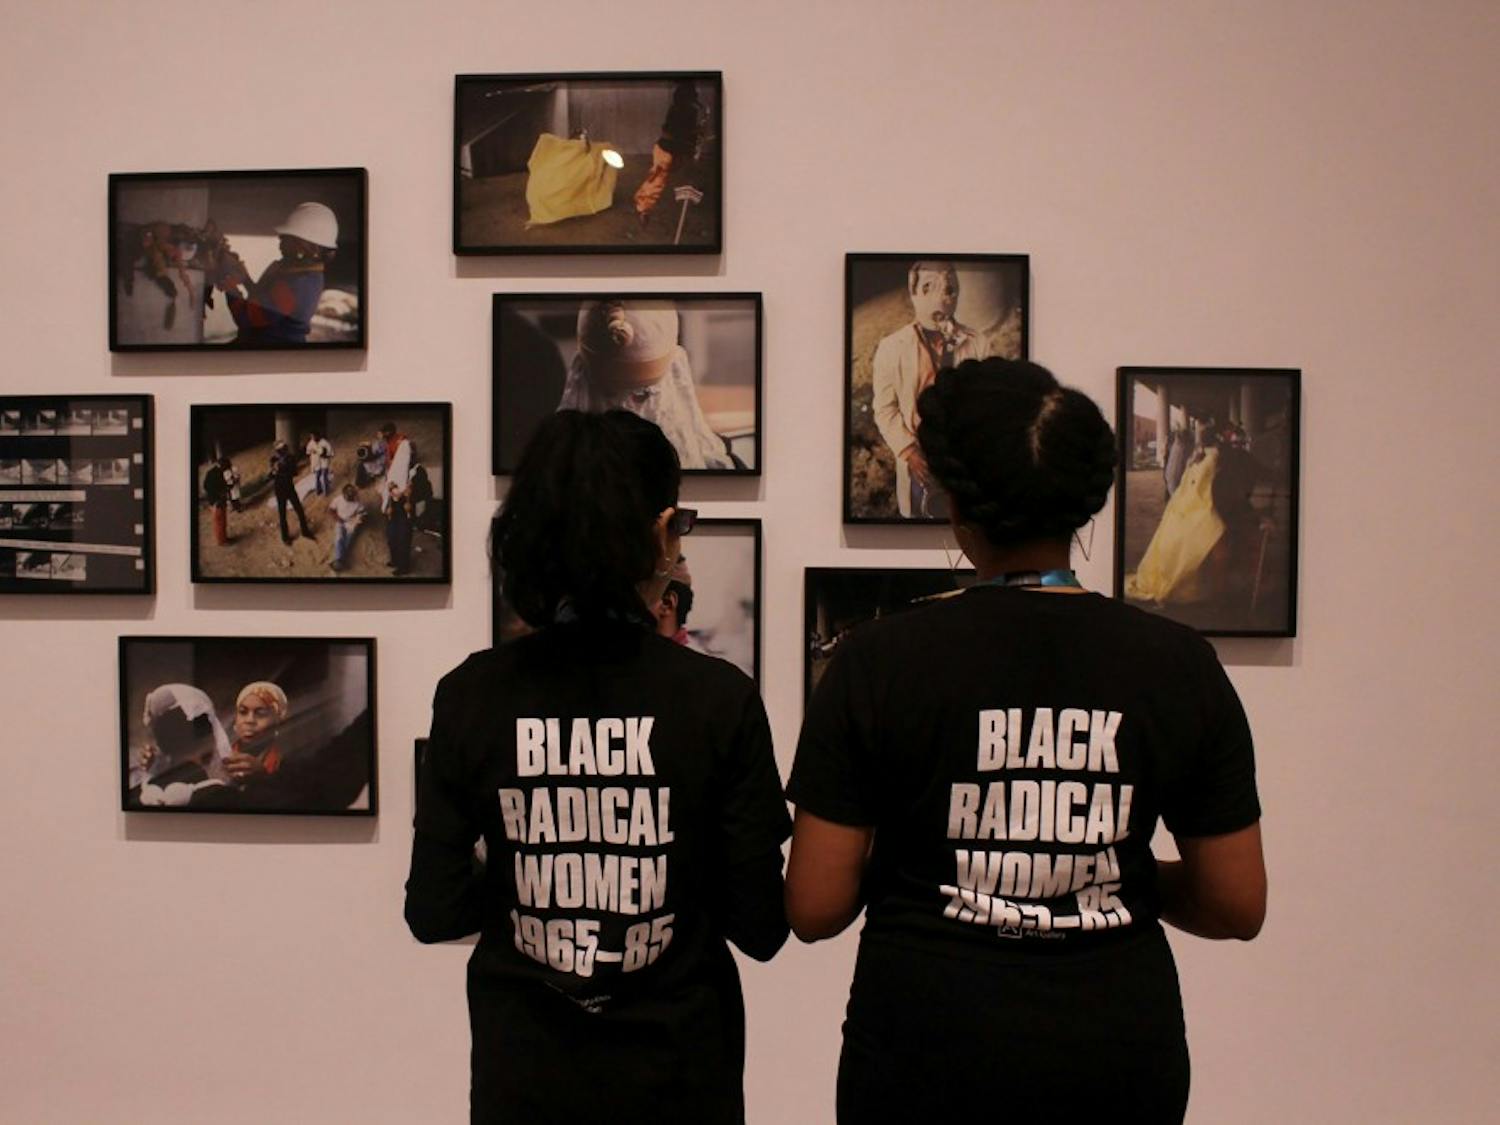 “We Wanted A Revolution” is a survey of work by women of color through a period encompassing civil rights, women’s rights, gay rights and anti-war movements. Throughout, visitors to the gallery can view works by black female artists like Faith Ringgold, Ming Smith and Emma Amos.